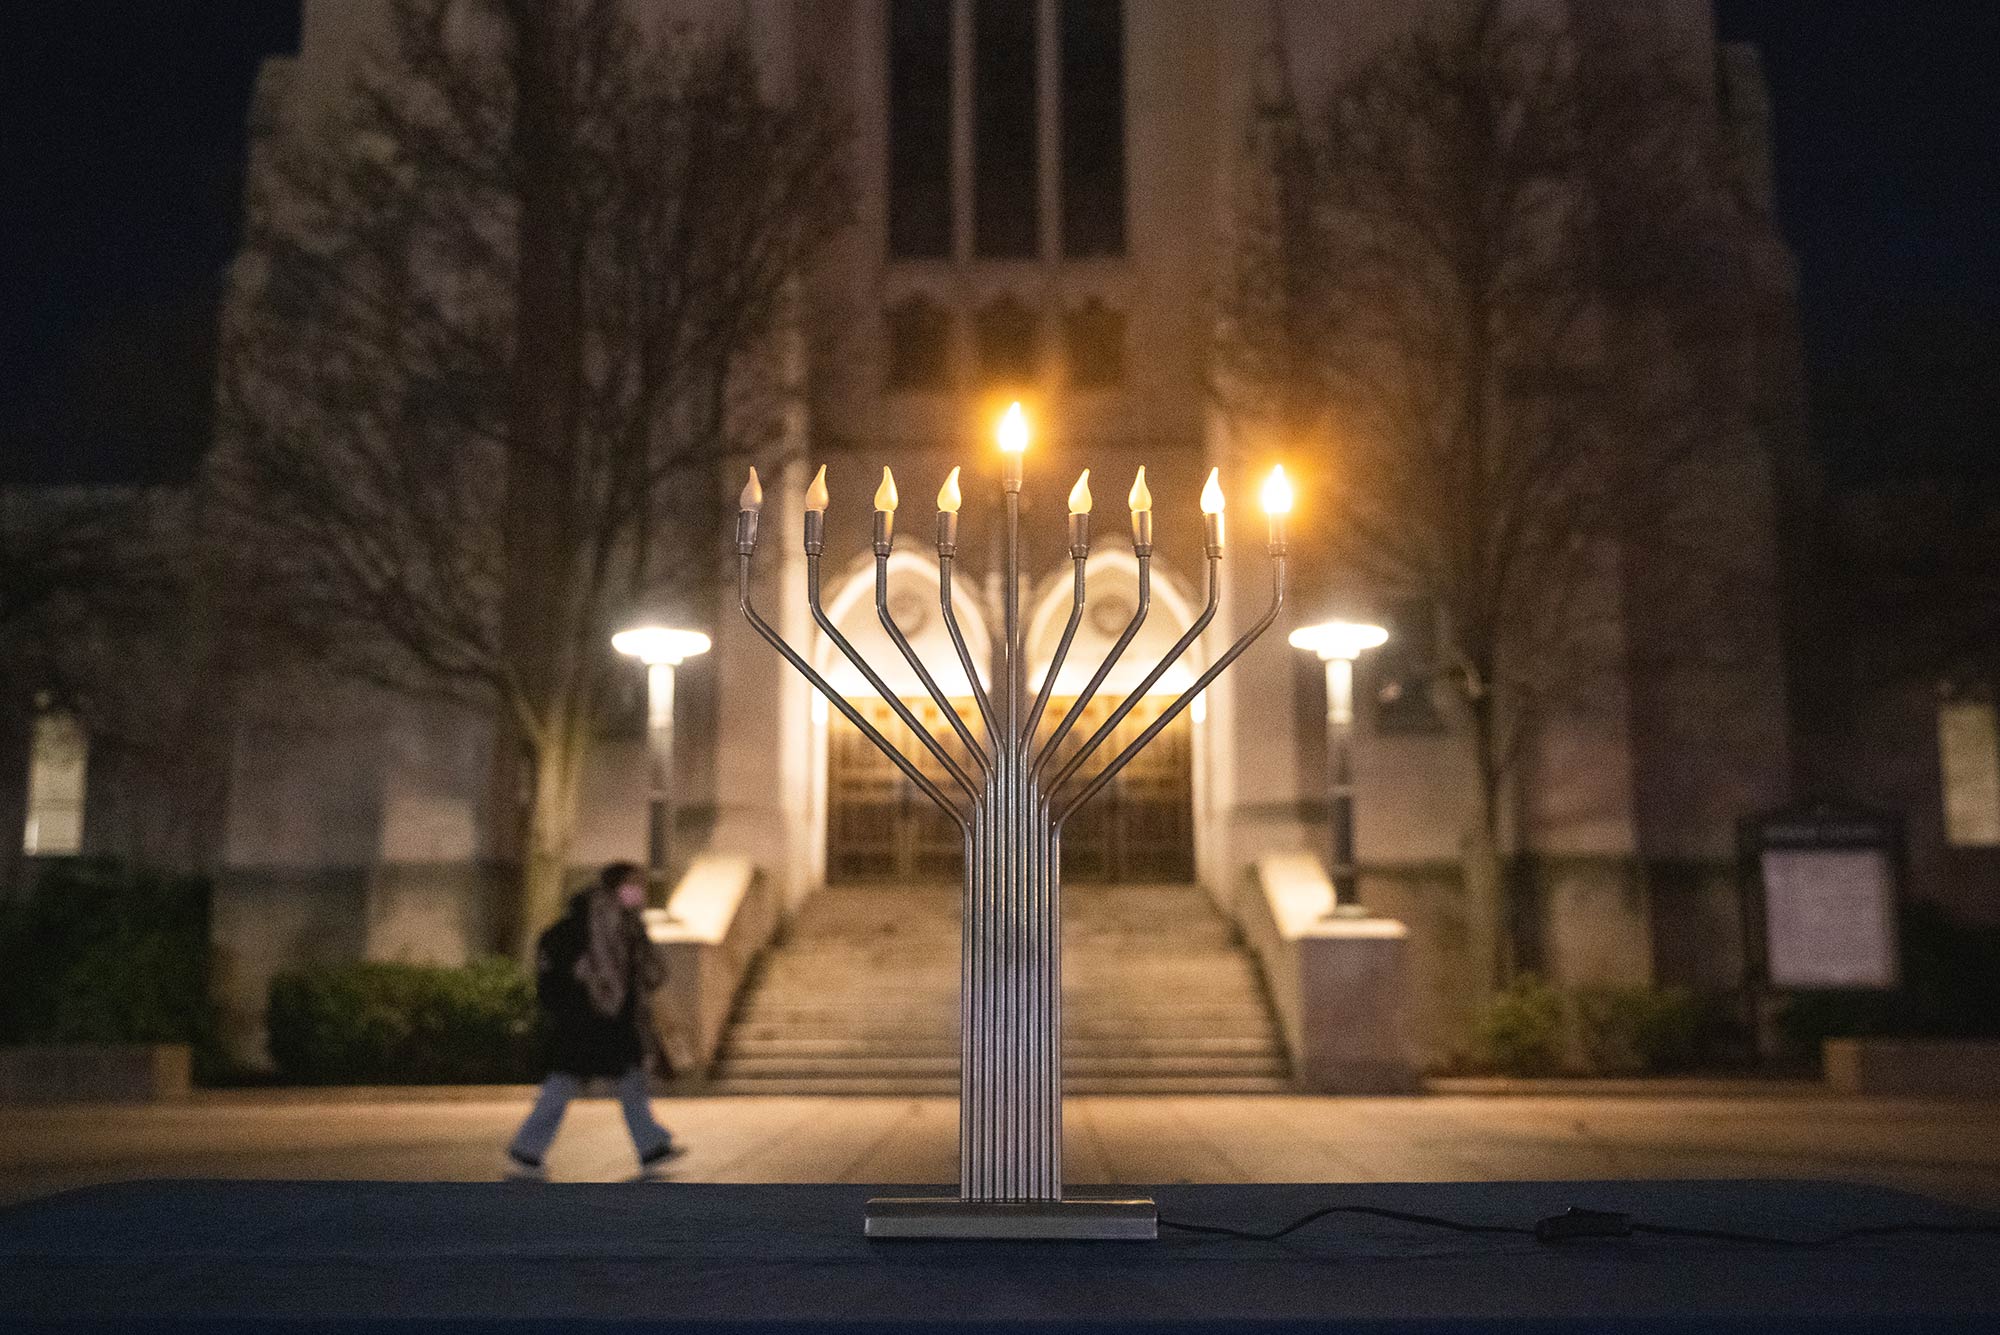 Photo of an electric menorah on a table in front of Marsh Chapel at night. The center and rightmost candle are light. A blurred person walks by in the background.